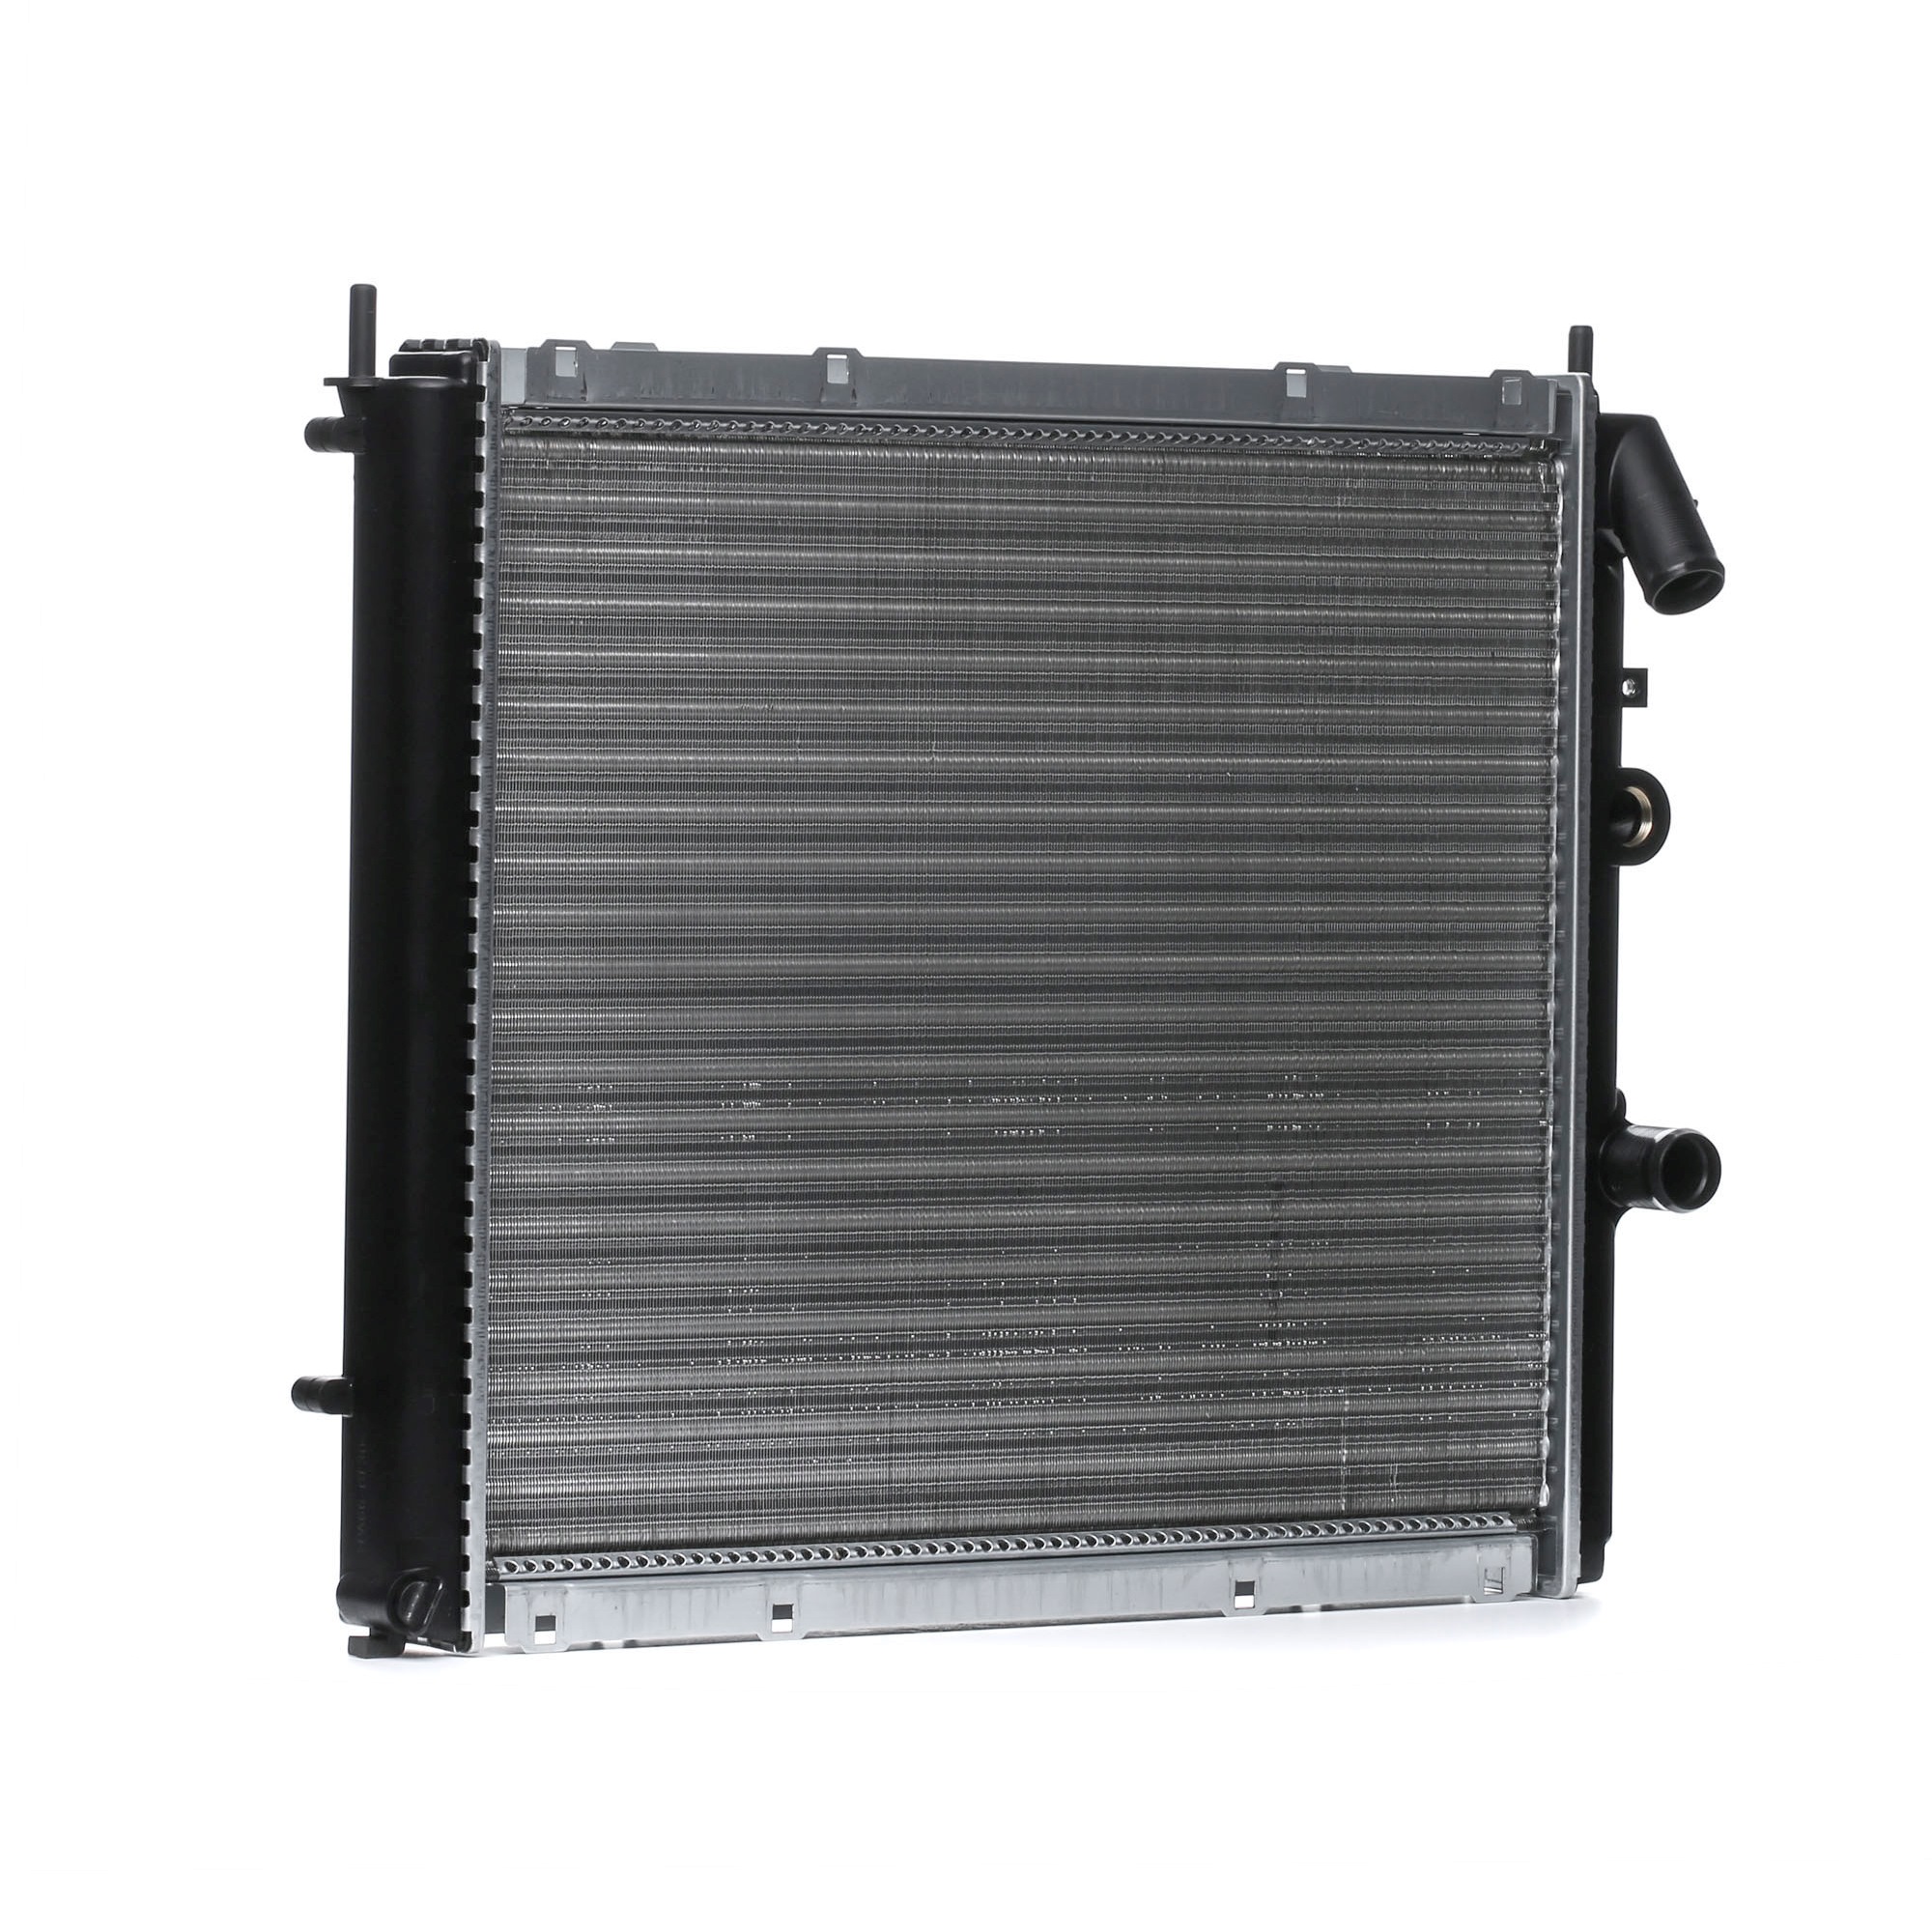 STARK SKRD-0120757 Engine radiator Aluminium, Plastic, for vehicles without air conditioning, for vehicles with/without air conditioning, Manual Transmission